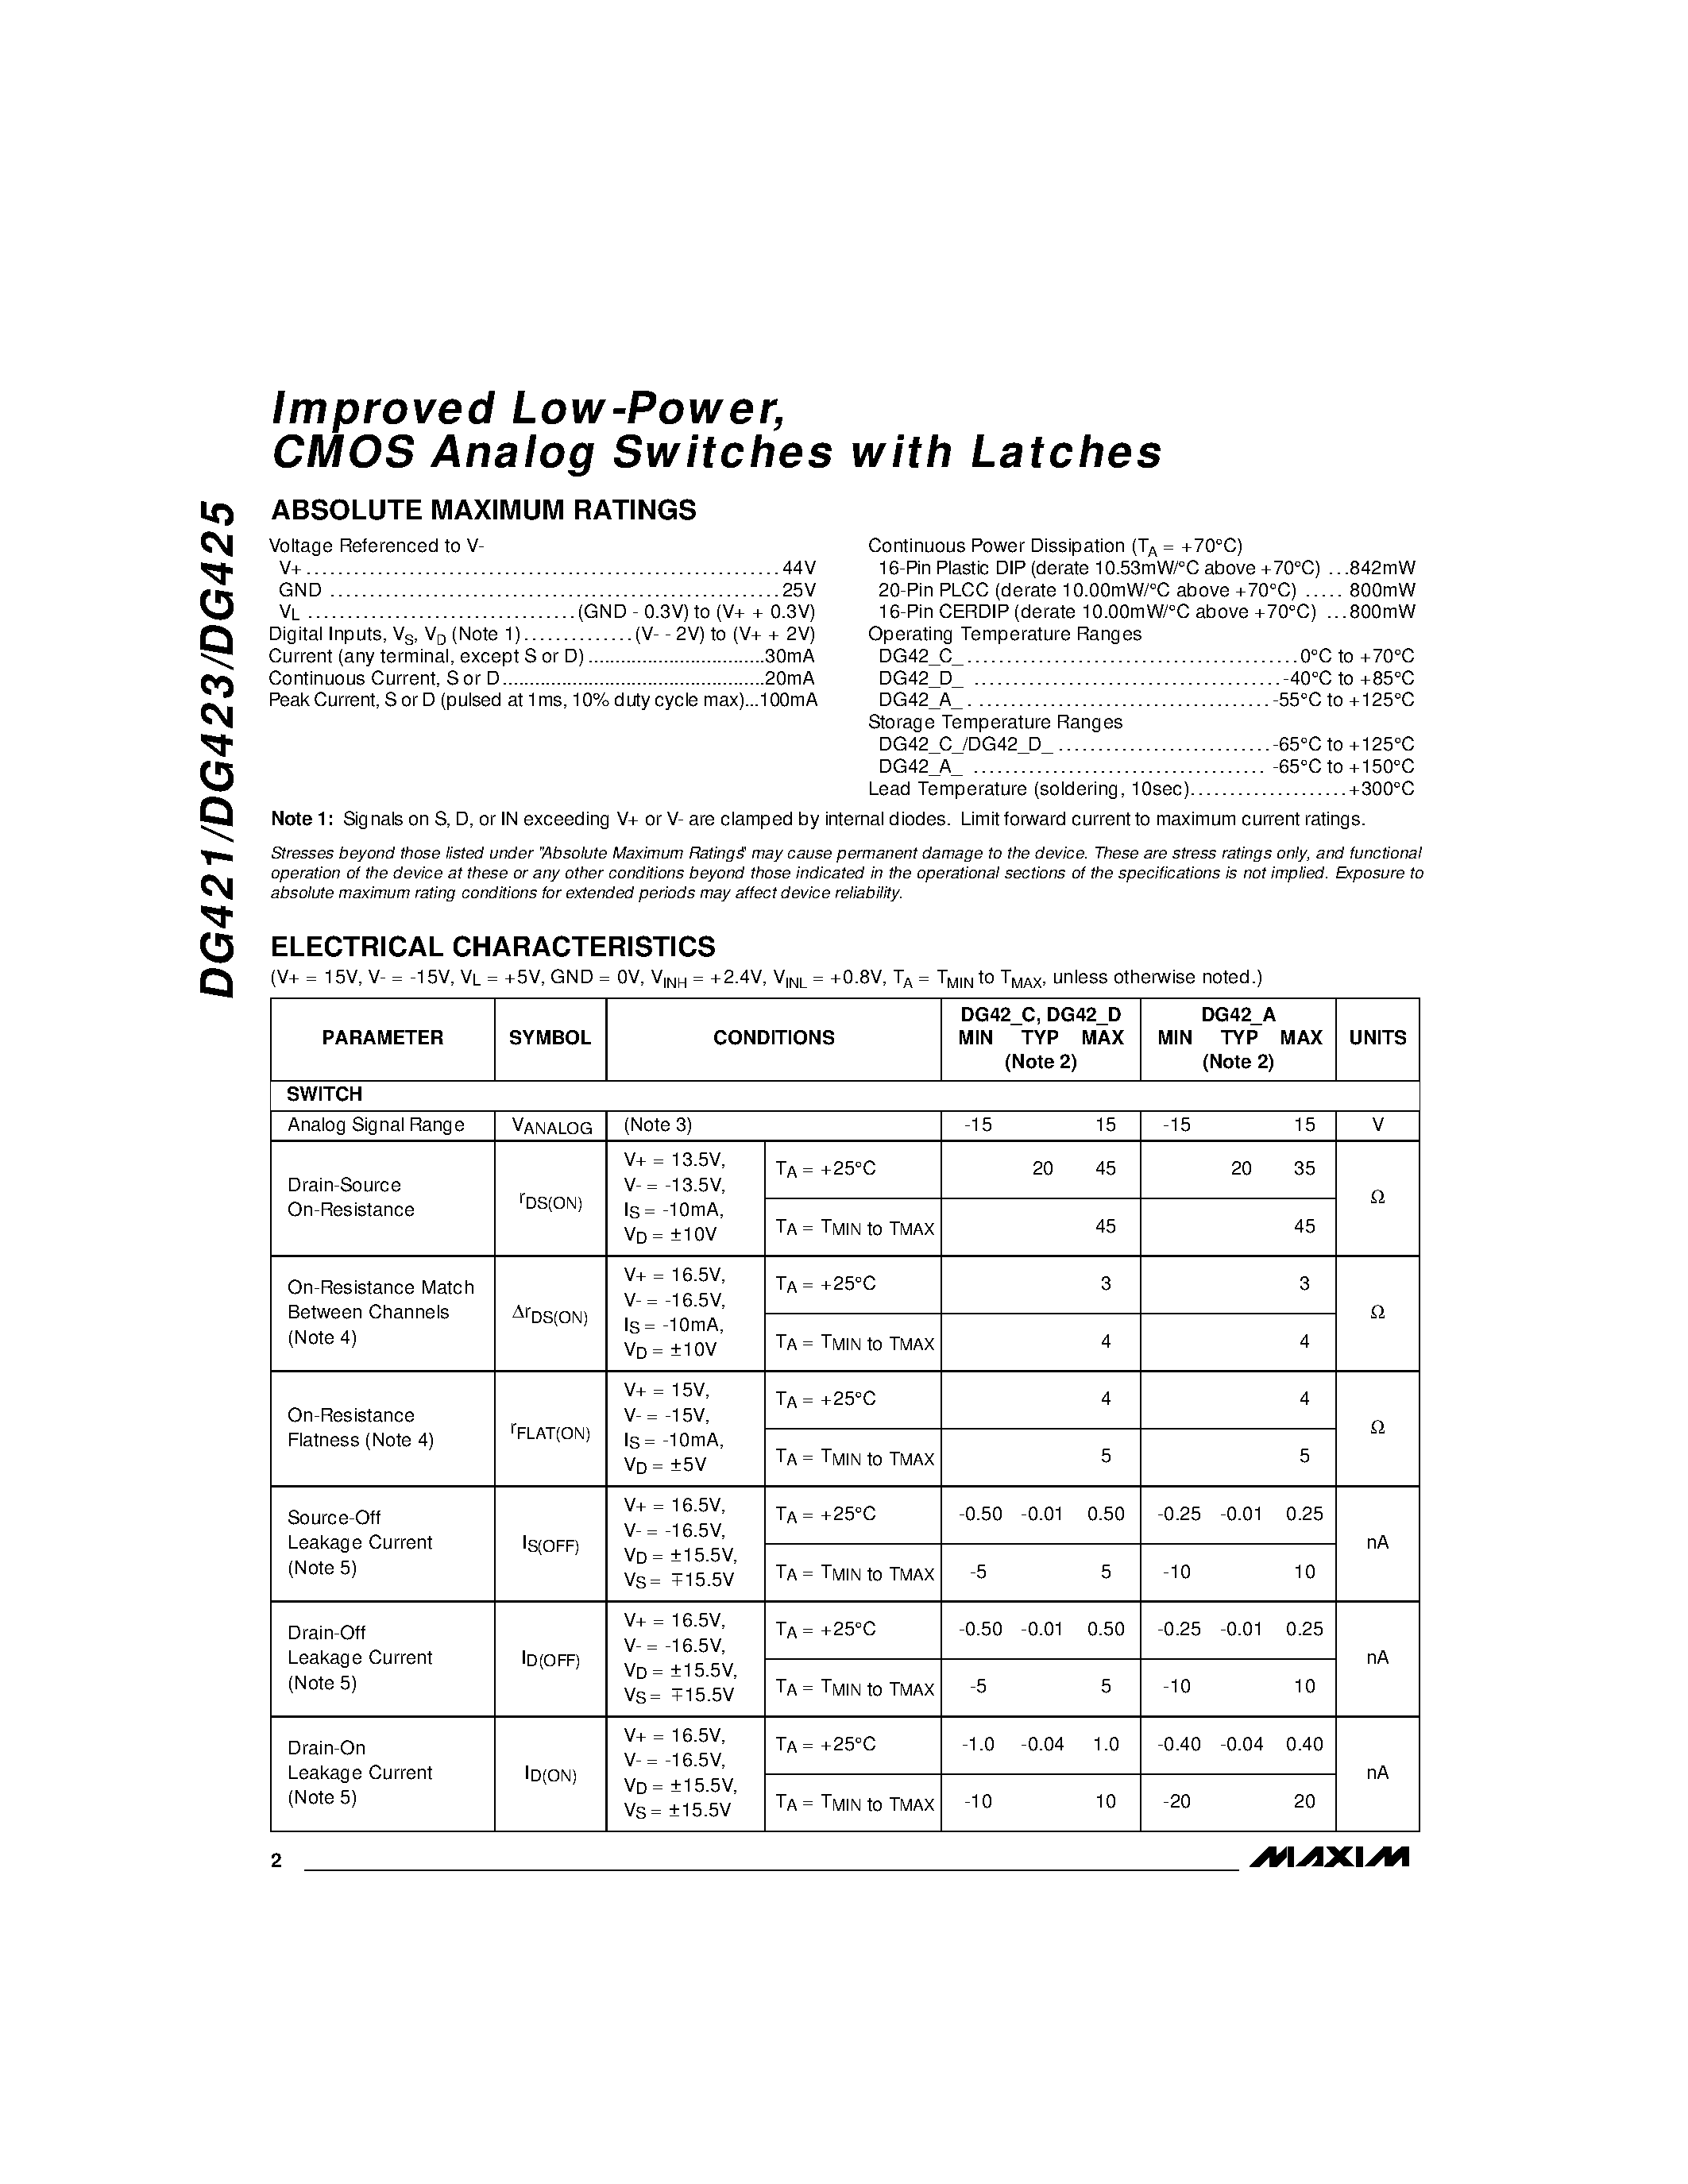 Datasheet DG423C/D - Improved Low-Power / CMOS Analog Switches with Latches page 2